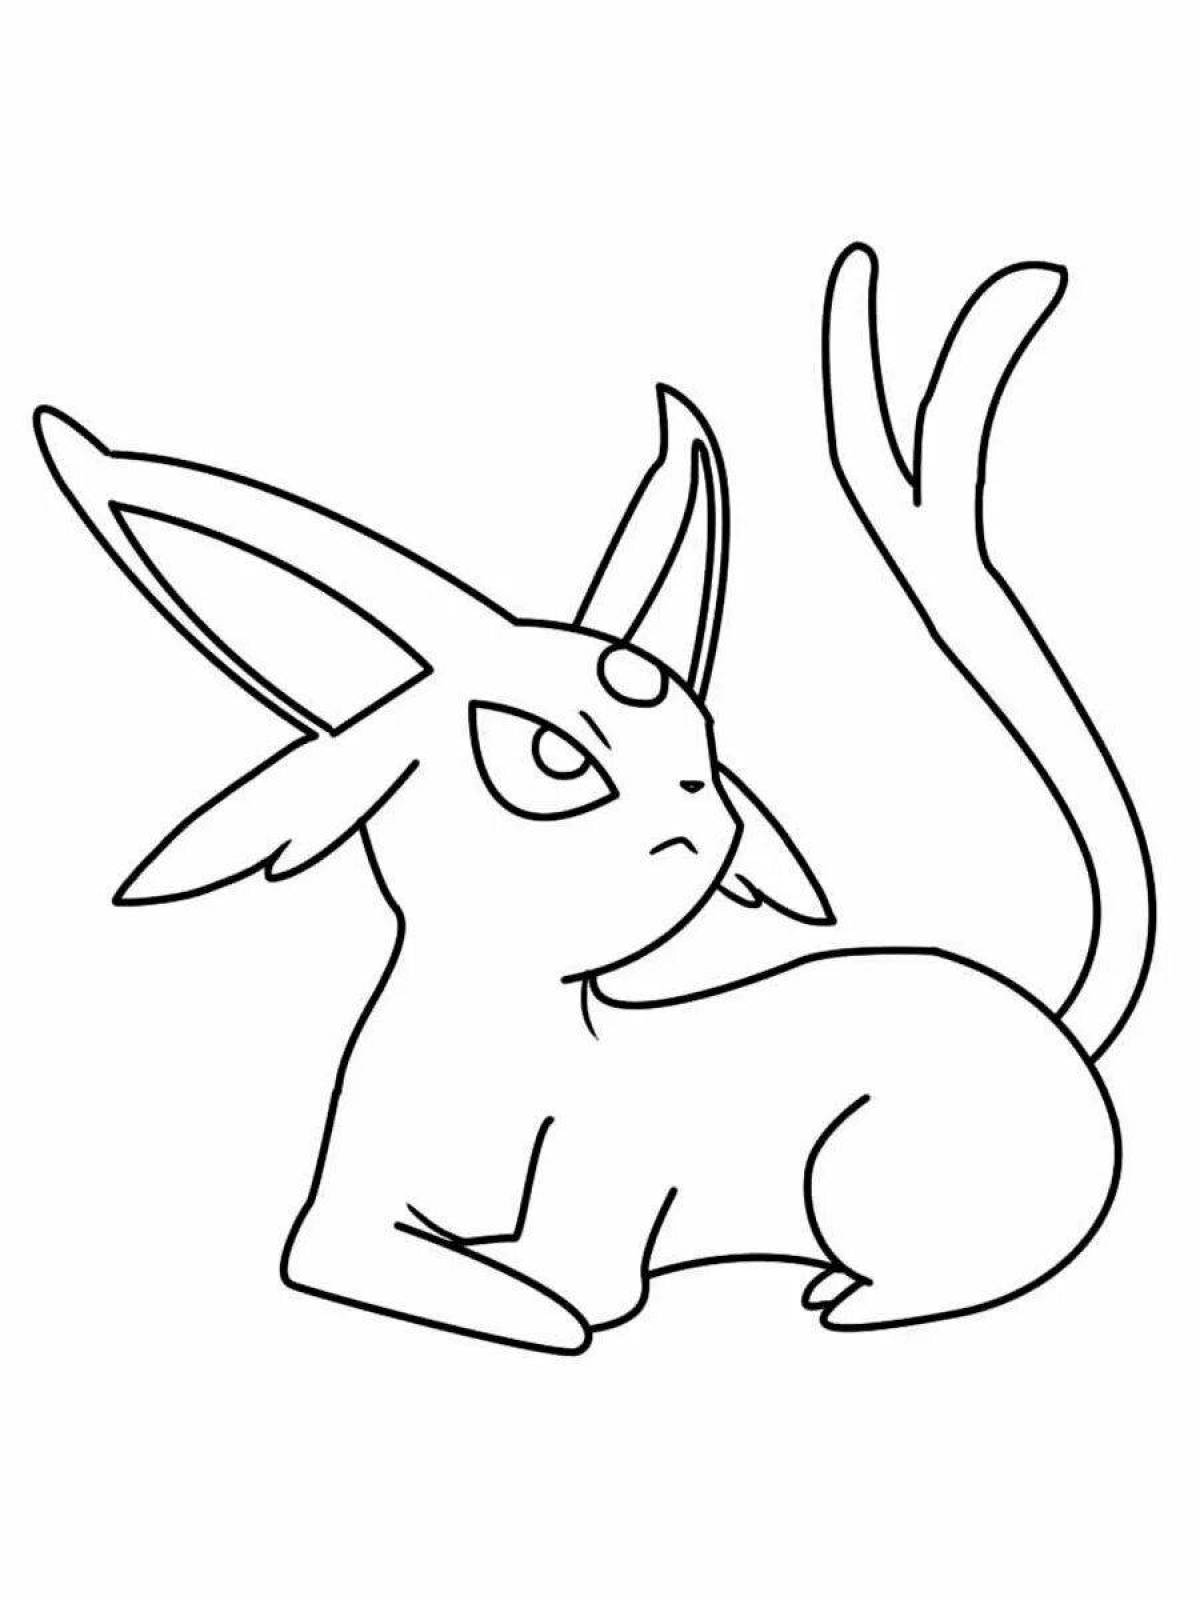 Evie and Pikachu Fairytale Coloring Page